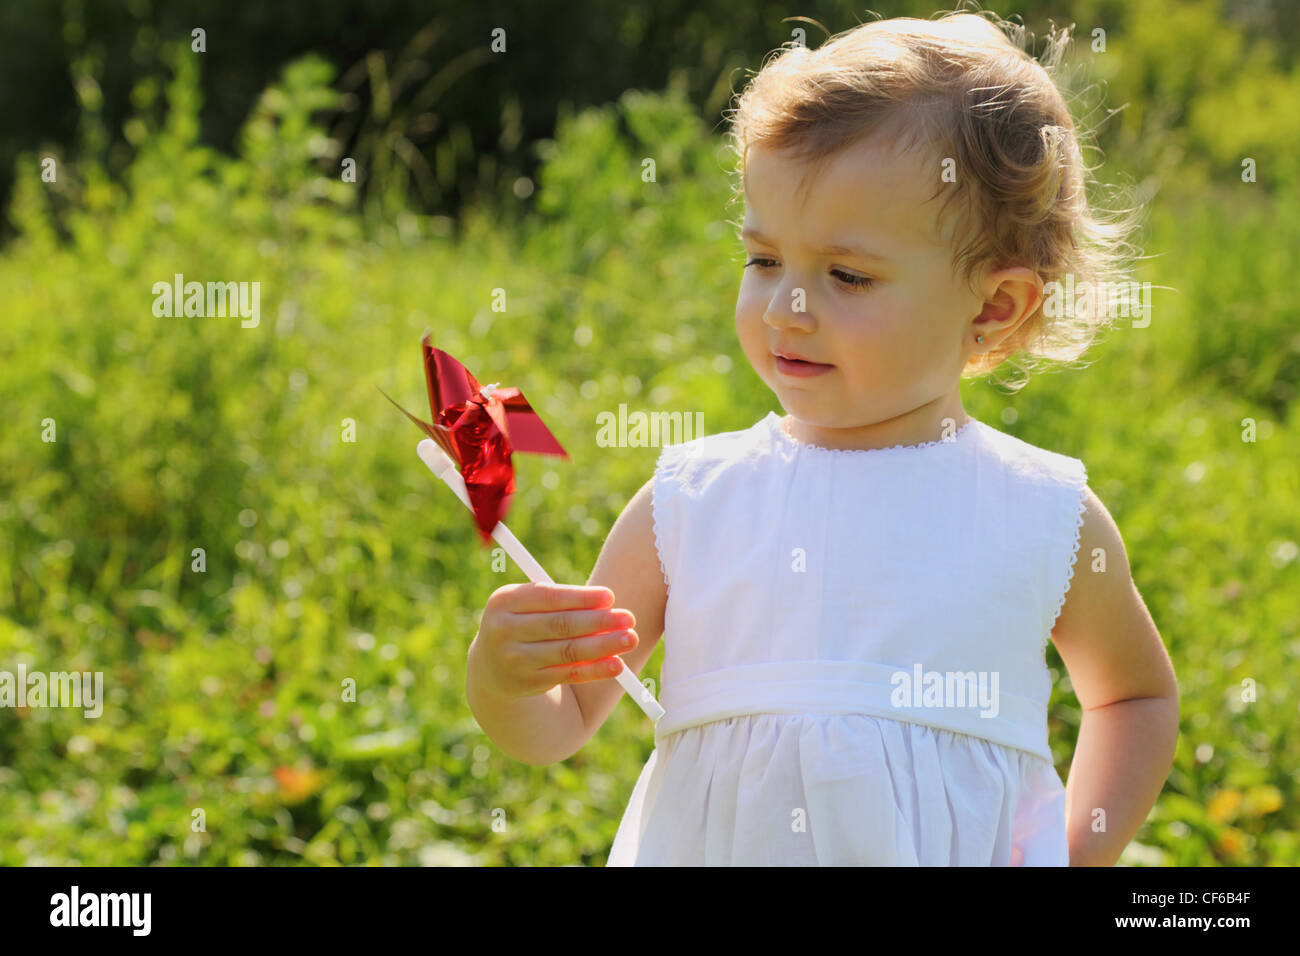 Little girl with the red pinwheel standing in the grass and looking at the pinwheel Stock Photo